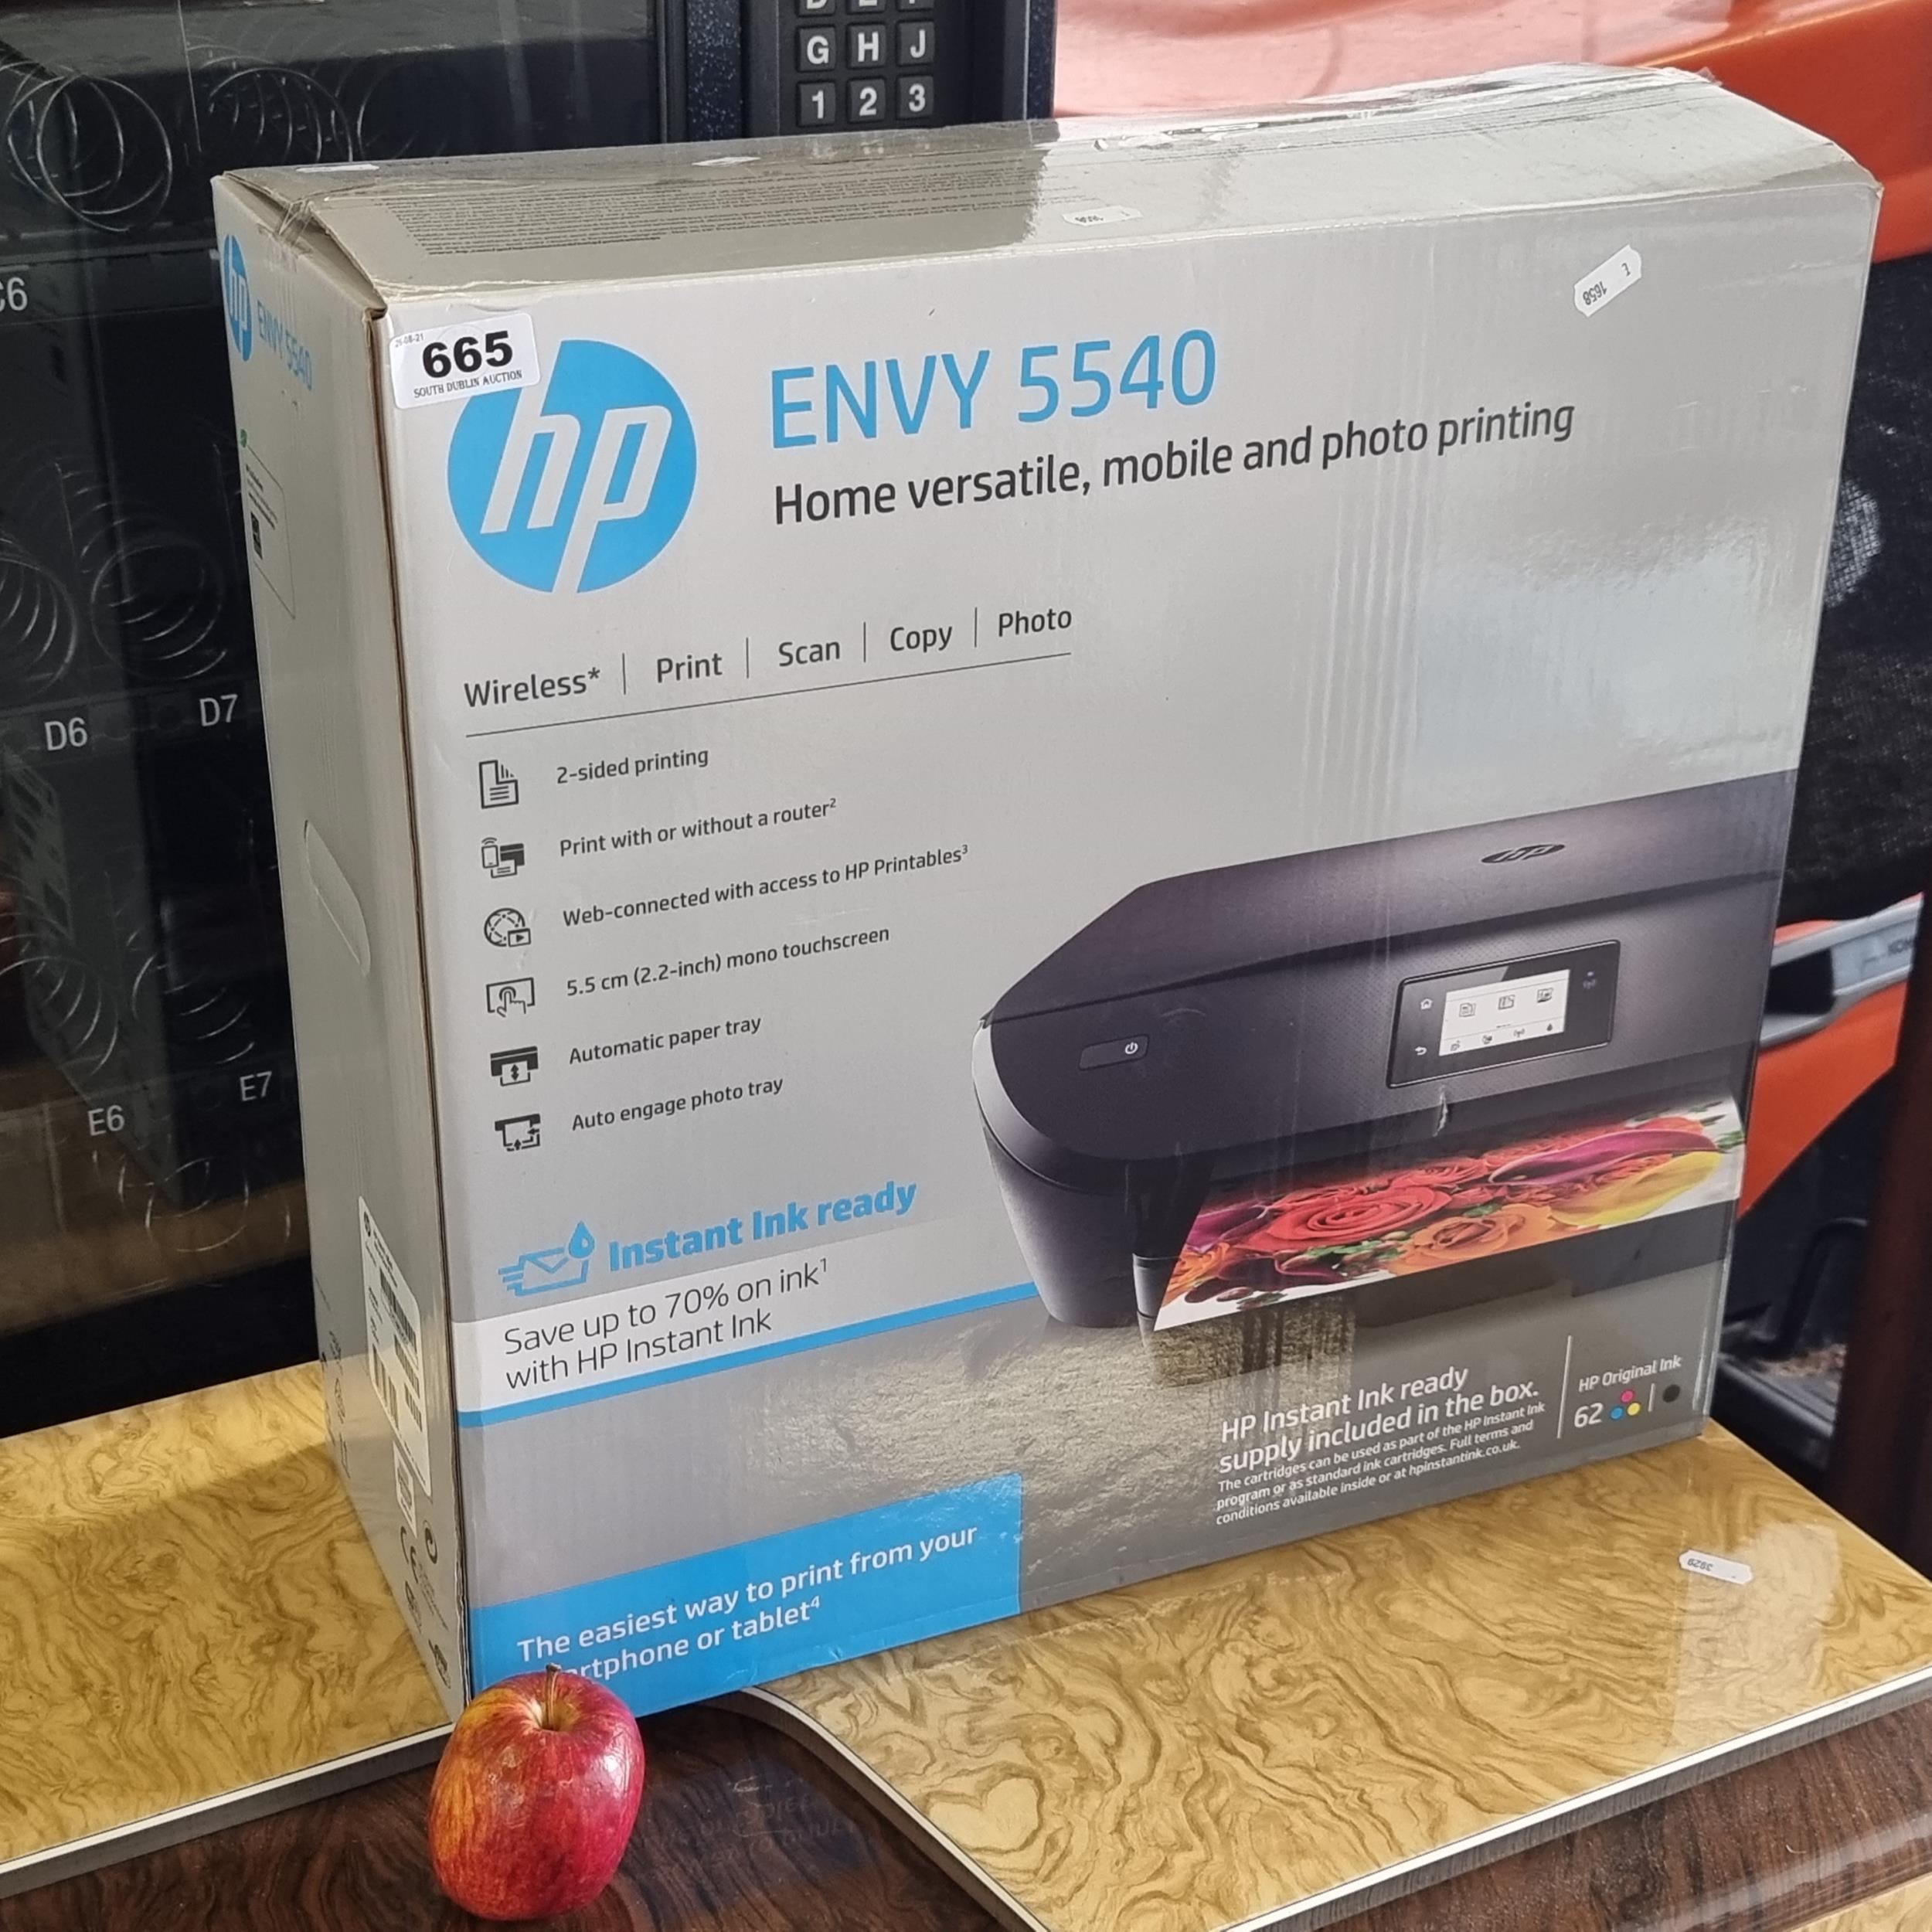 Envy 5540 All-in-One Printer in box, never according to vendor.